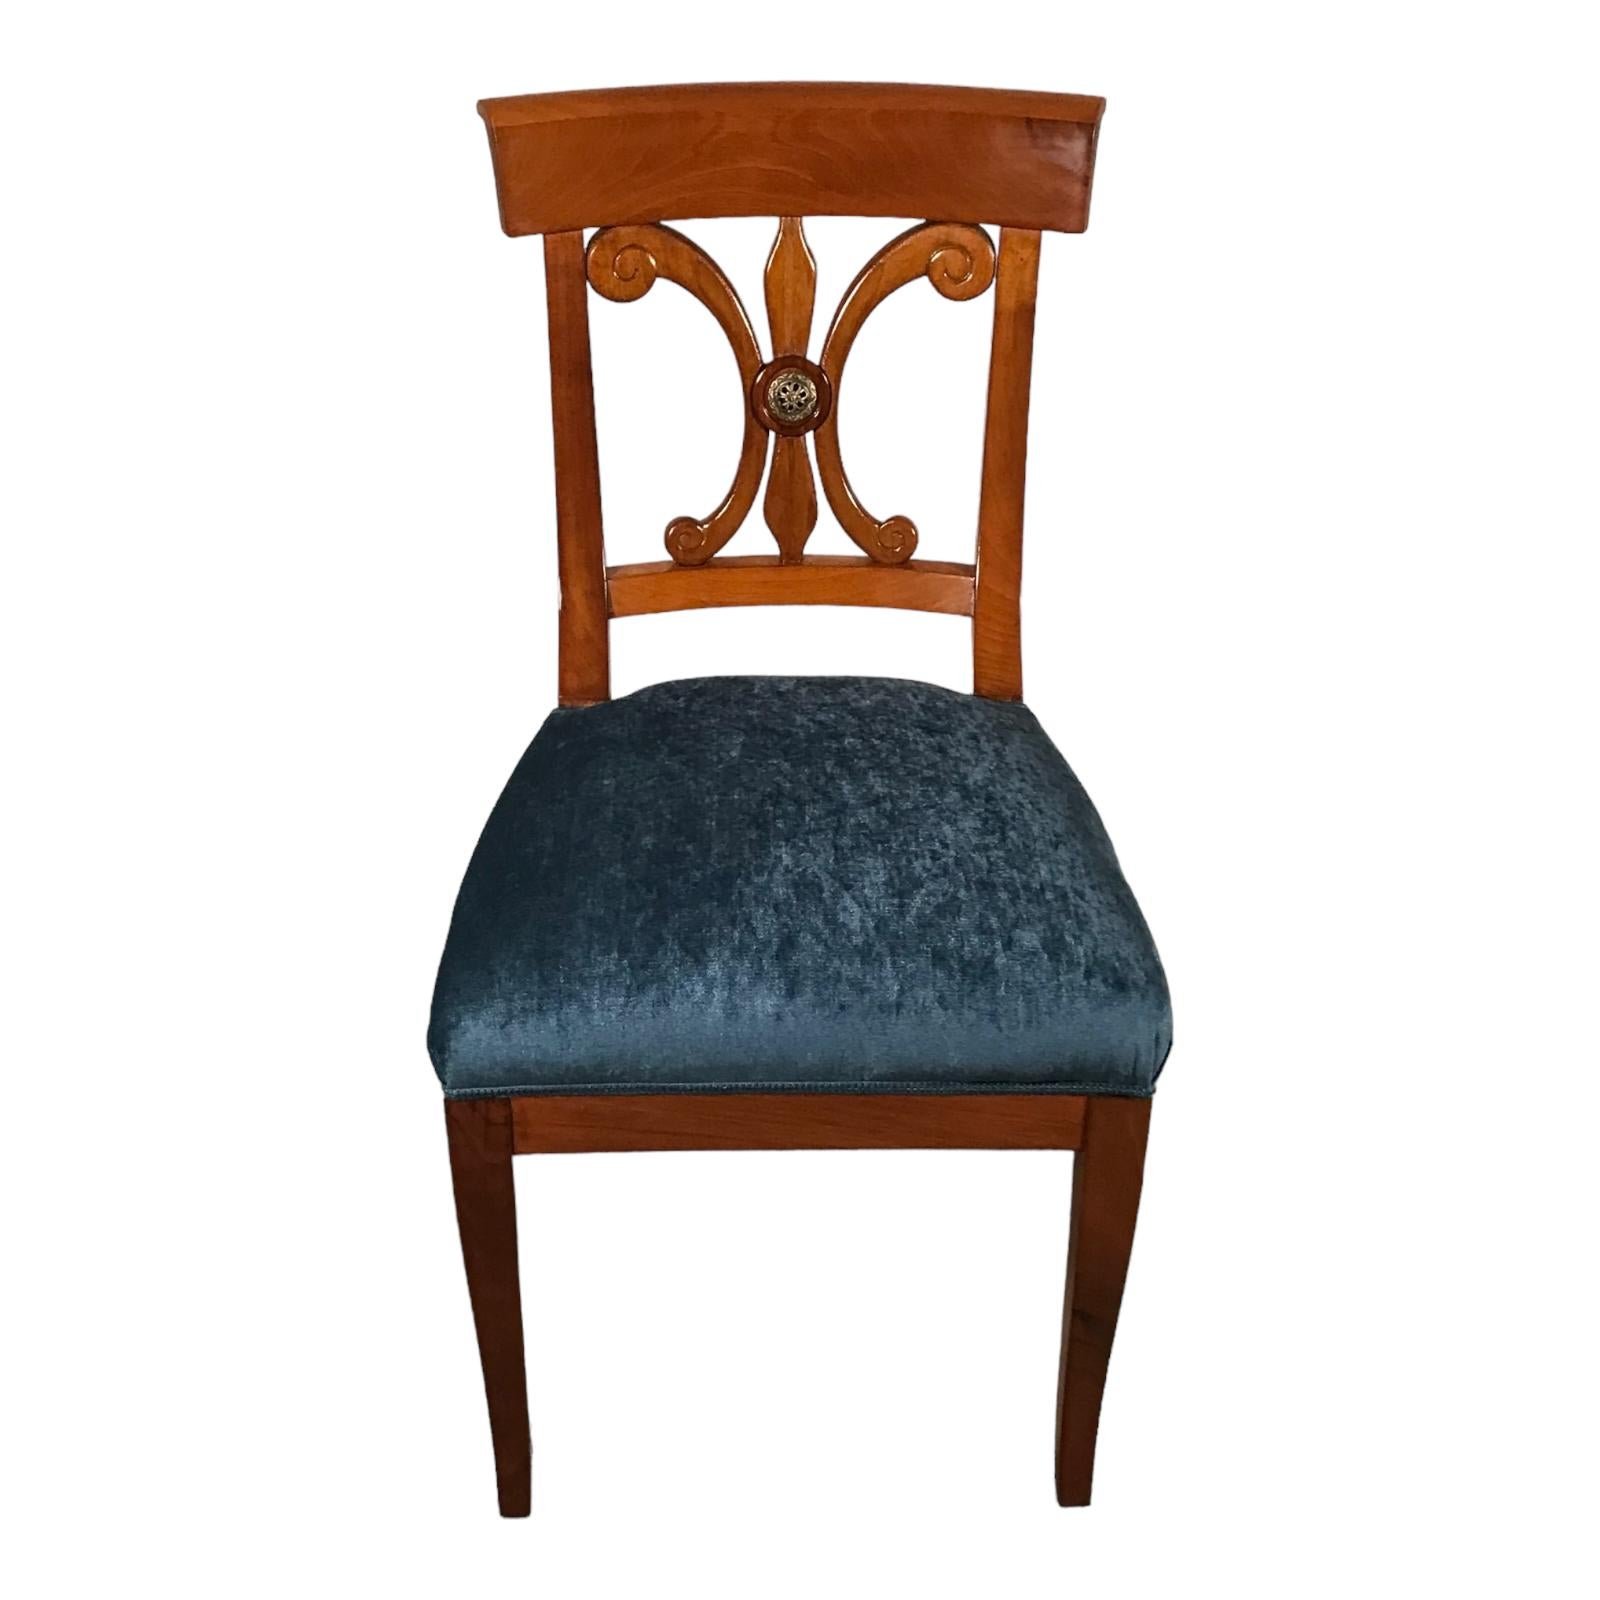 Authentic Biedermeier Chairs  Handcrafted 19th Century Masterpieces

Explore our stunning set of 6 original Biedermeier chairs, showcasing exquisite craftsmanship from the early 19th century. Handmade with meticulous attention to detail, these